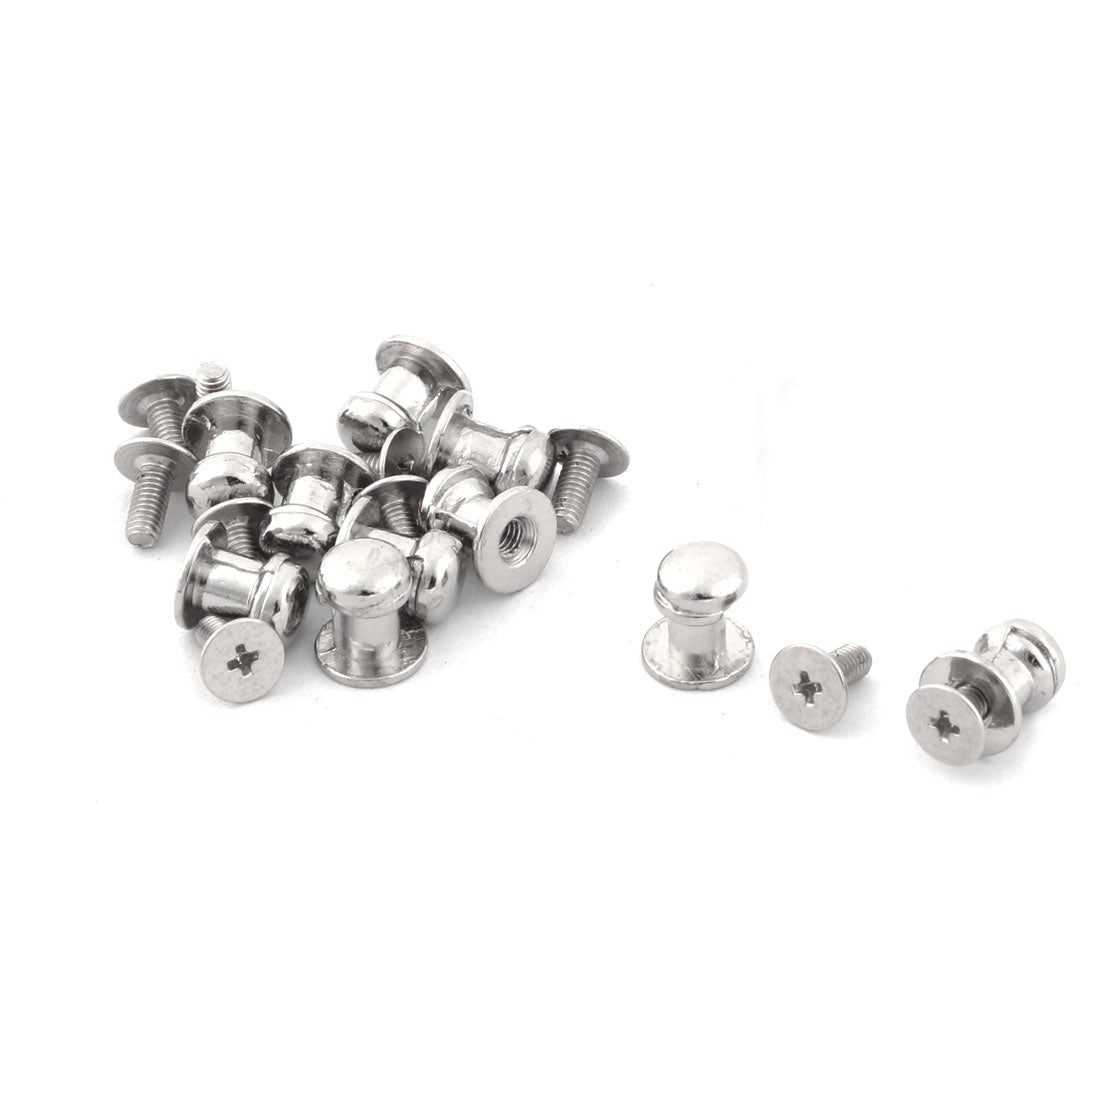 uxcell Uxcell Drawer Metal Round Base Single Hole Retro Pull Handle Knob Silver Tone 10 PCS